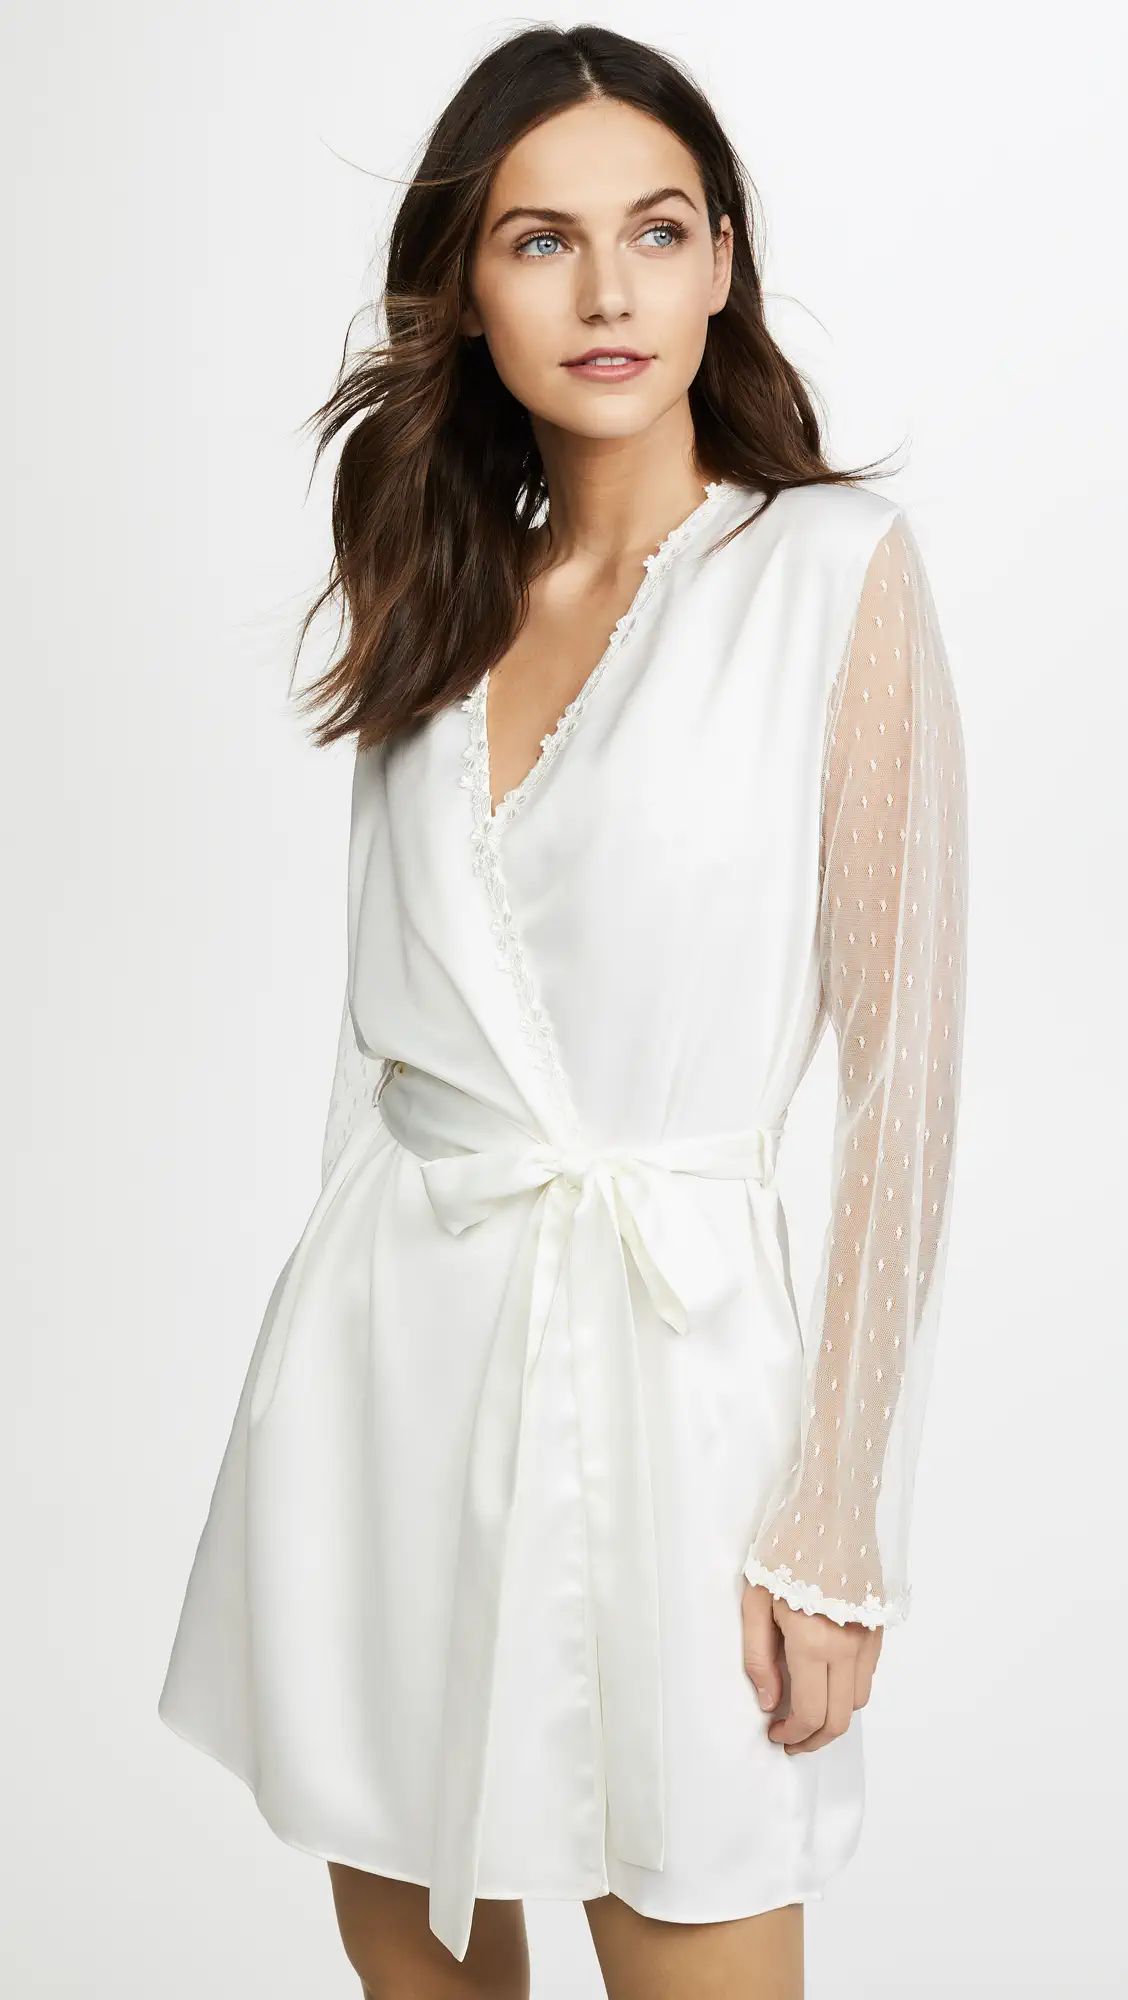 Flora Nikrooz Showstopper Charmeuse Robe With Lace | Shopbop | Shopbop